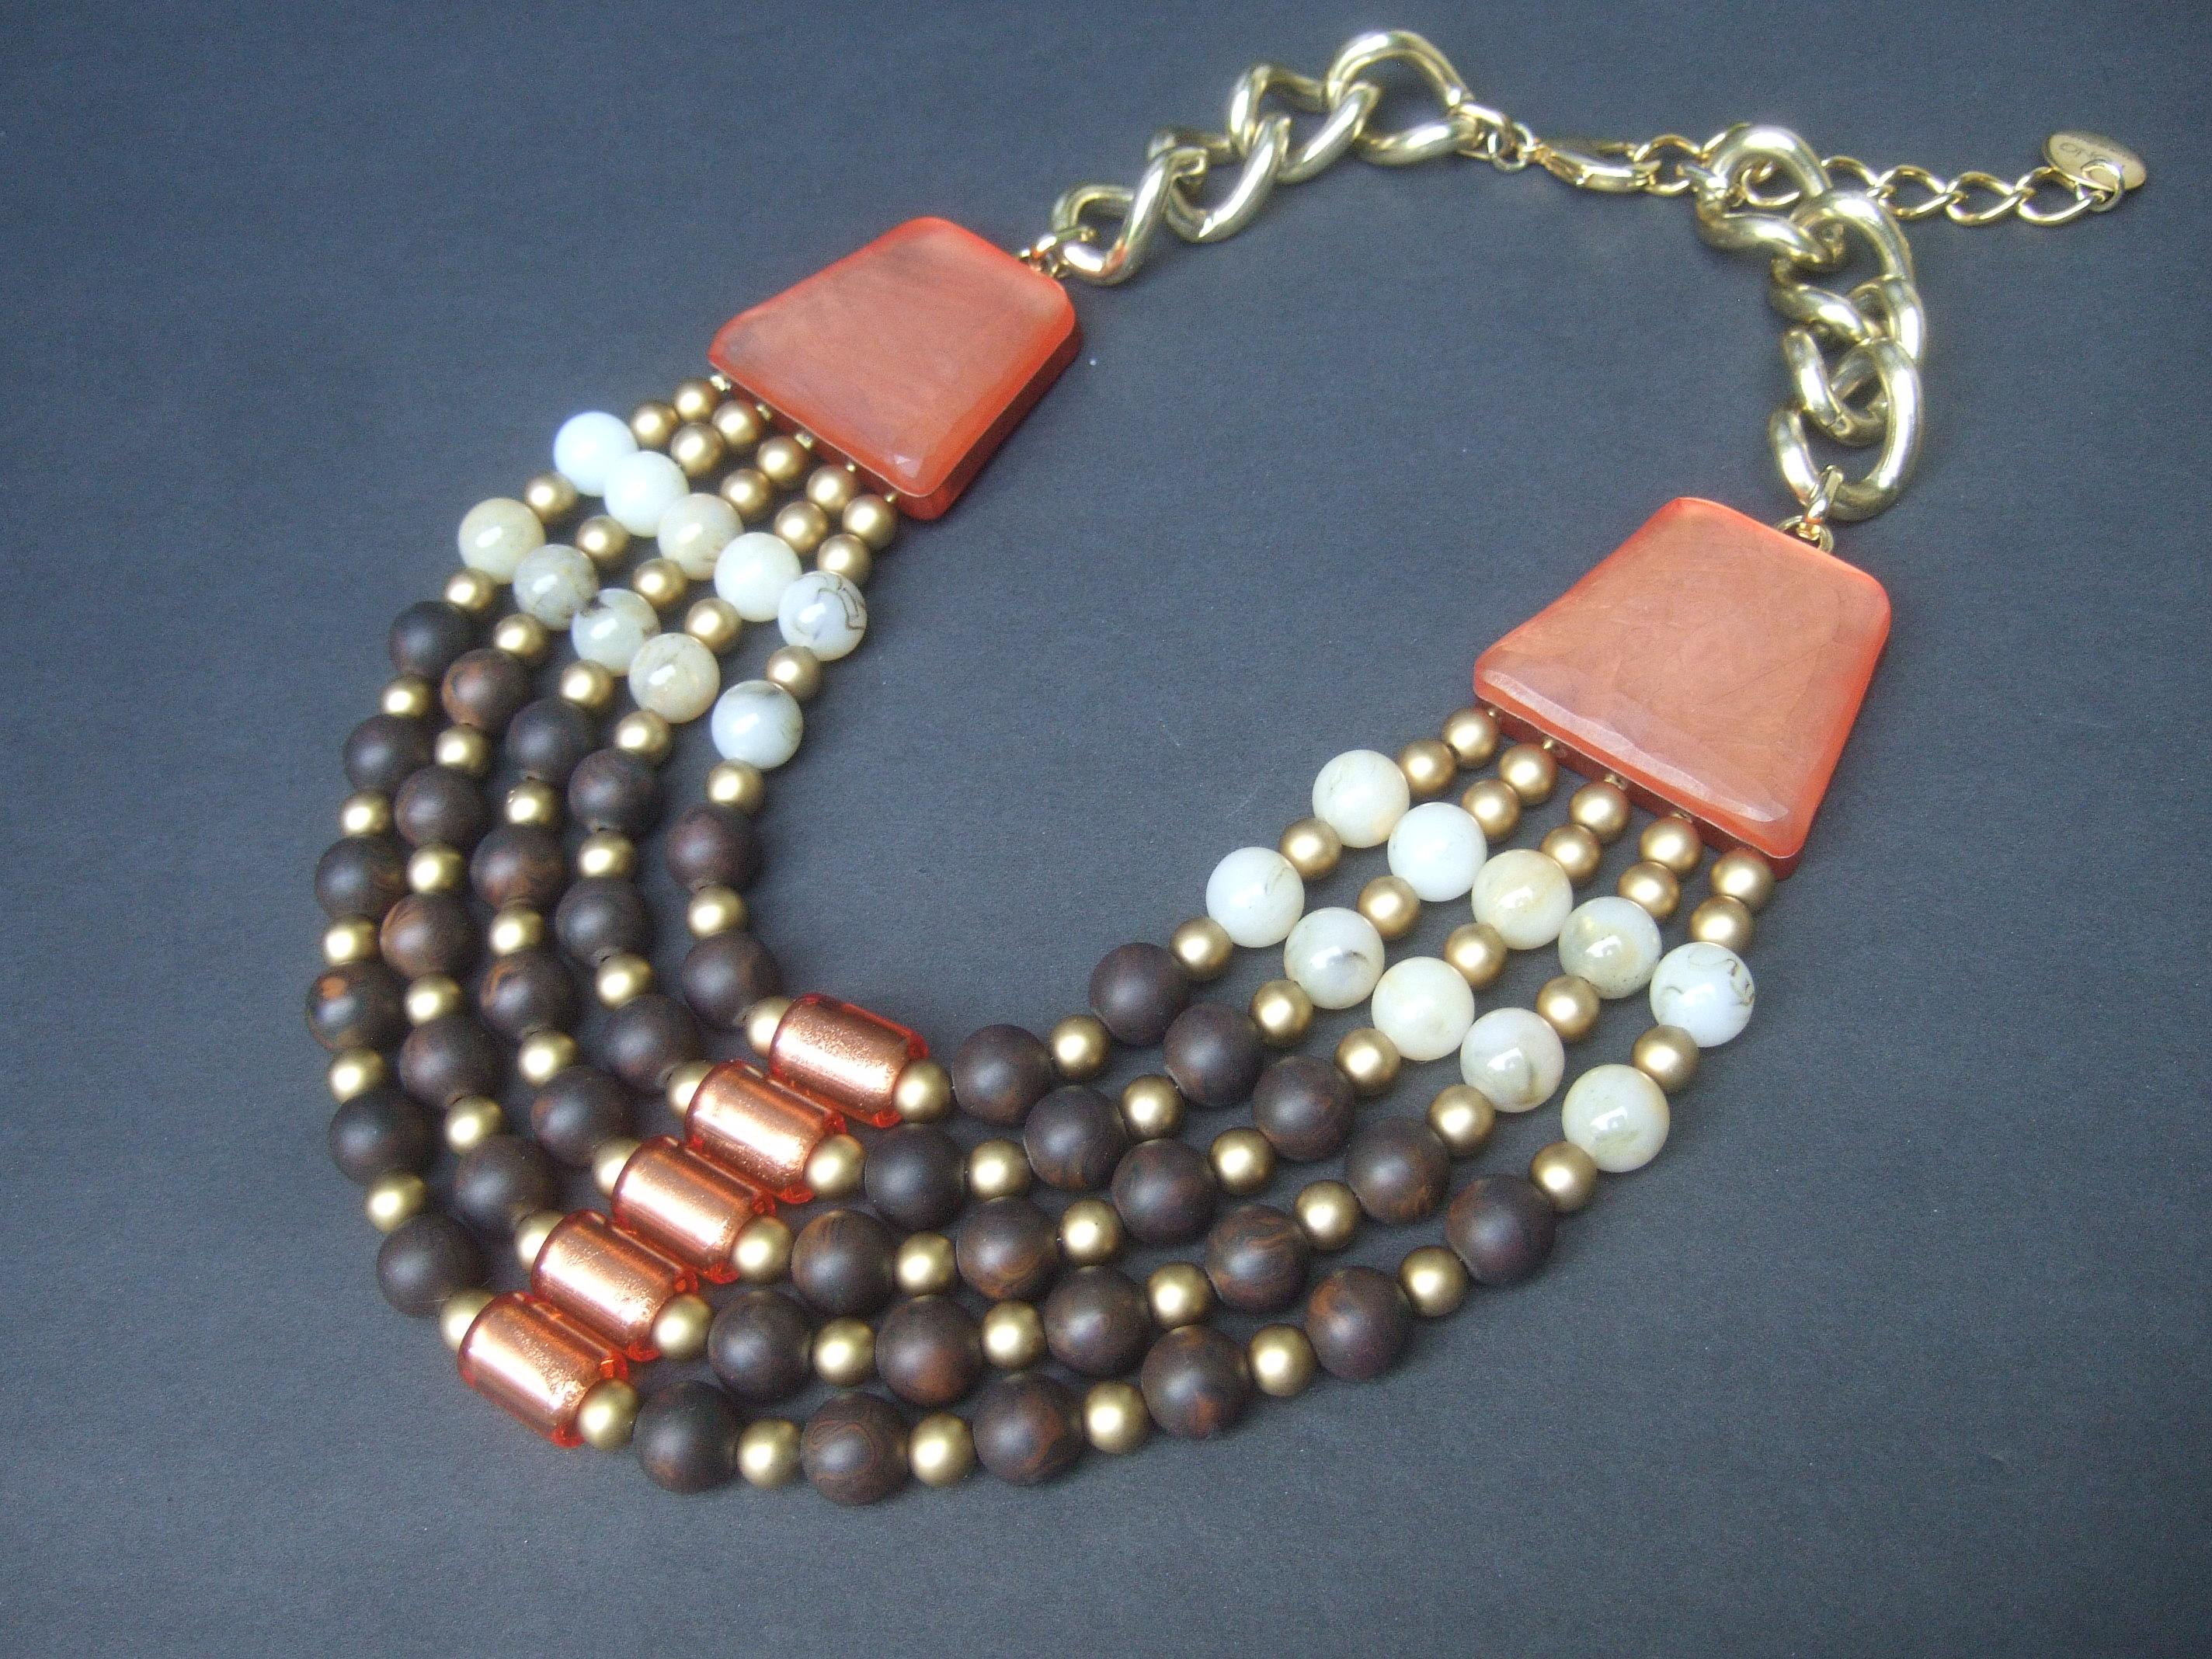 Italian resin beaded bib statement necklace designed by Pono  circa 1980s

The unique large scale bib necklace is comprised of five strands of resin beads in various sizes & colors that range from dark brown, matte gold, milky beige & copper peach